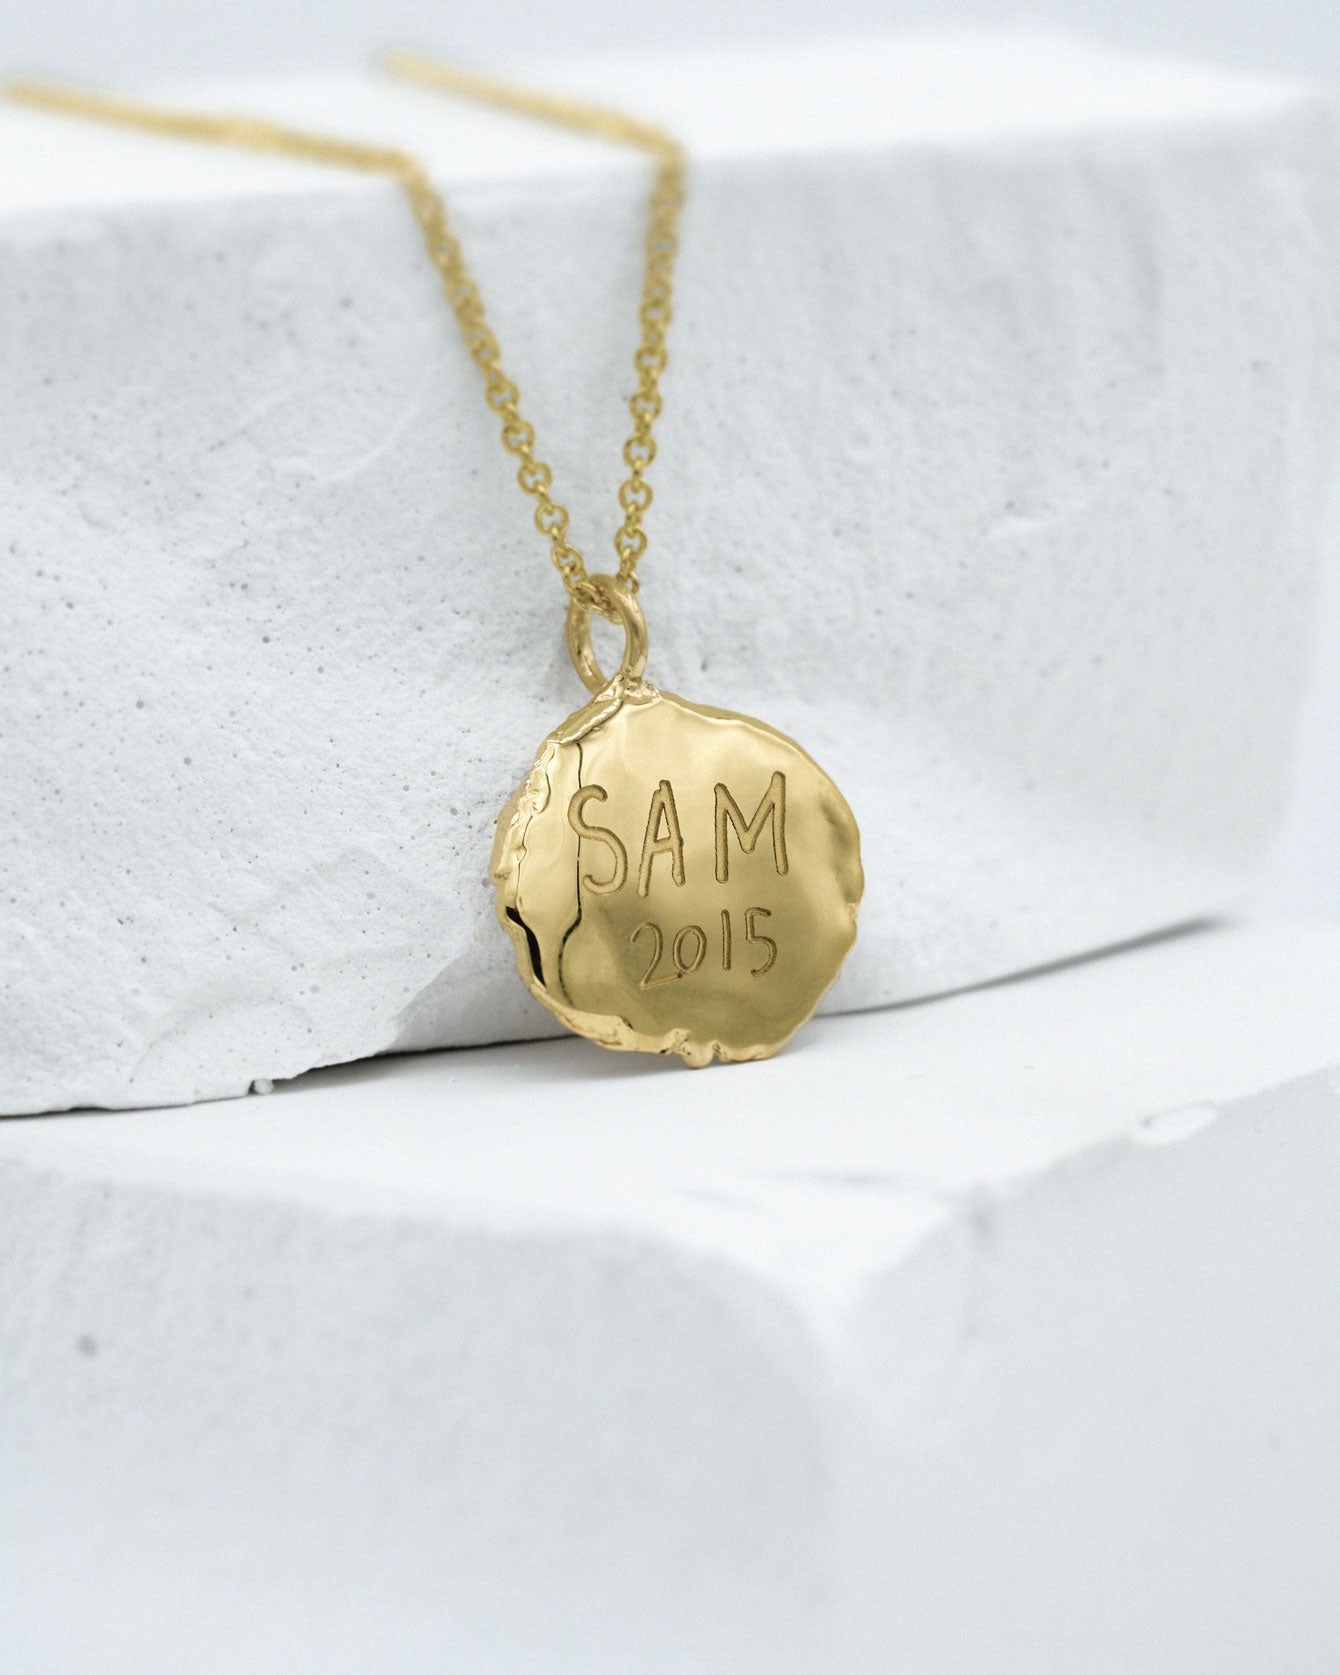 Fingerprint Necklace in solid gold on 1.5mm chain